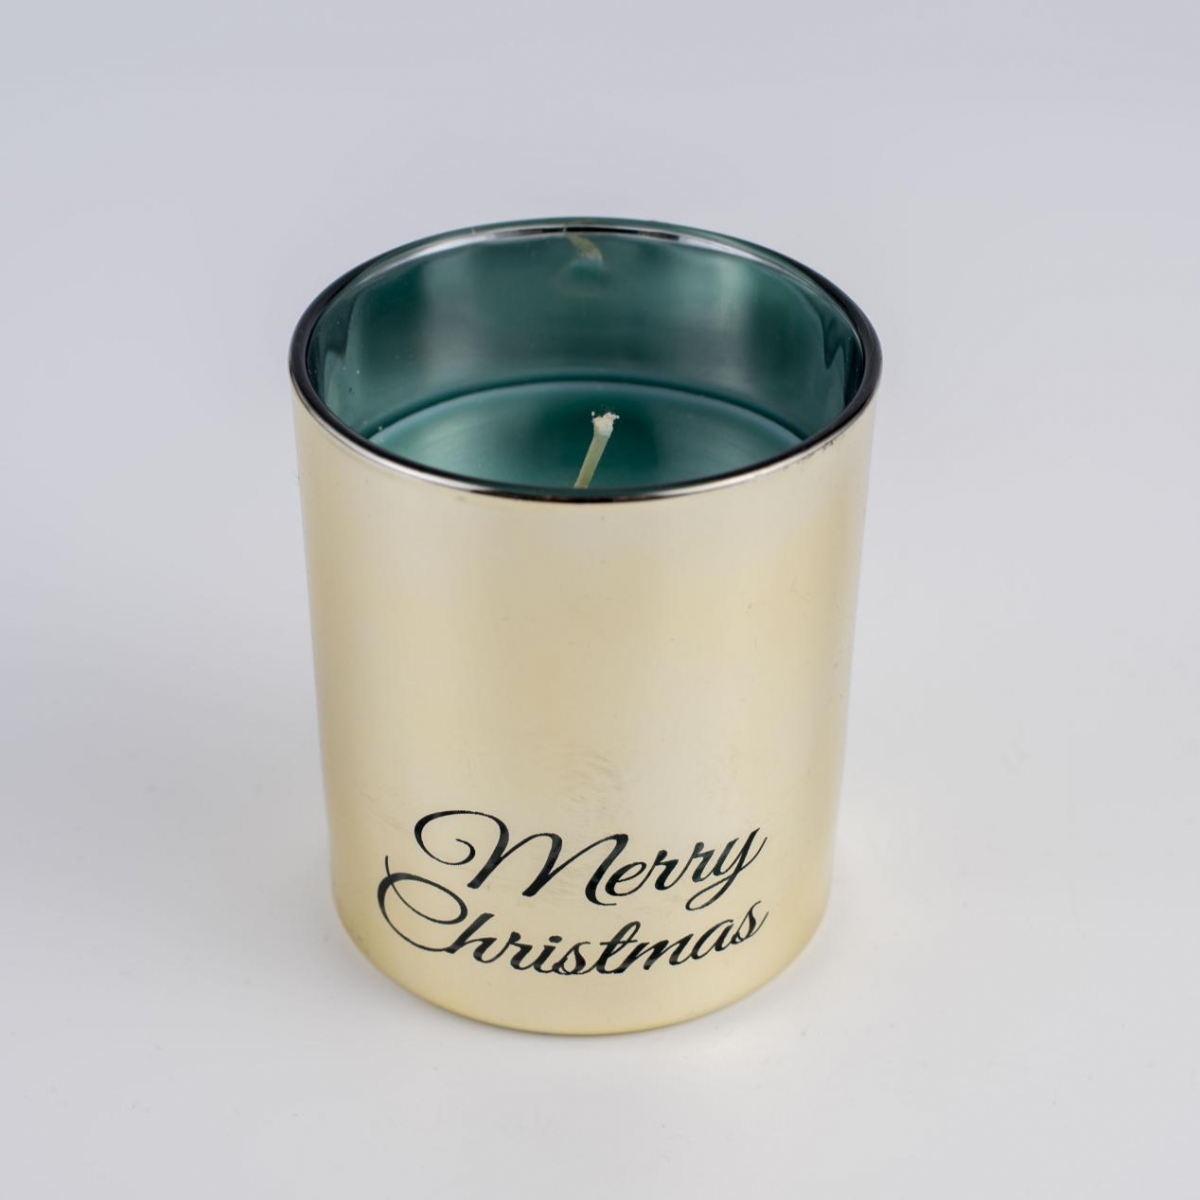 Vegan Candles :Best Soy Wax, Natural Essential Oils, Christmas Candles ,China Factory ,Cheapest Price-HOWCANDLE-Candles,Scented Candles,Aromatherapy Candles,Soy Candles,Vegan Candles,Jar Candles,Pillar Candles,Candle Gift Sets,Essential Oils,Reed Diffuser,Candle Holder,